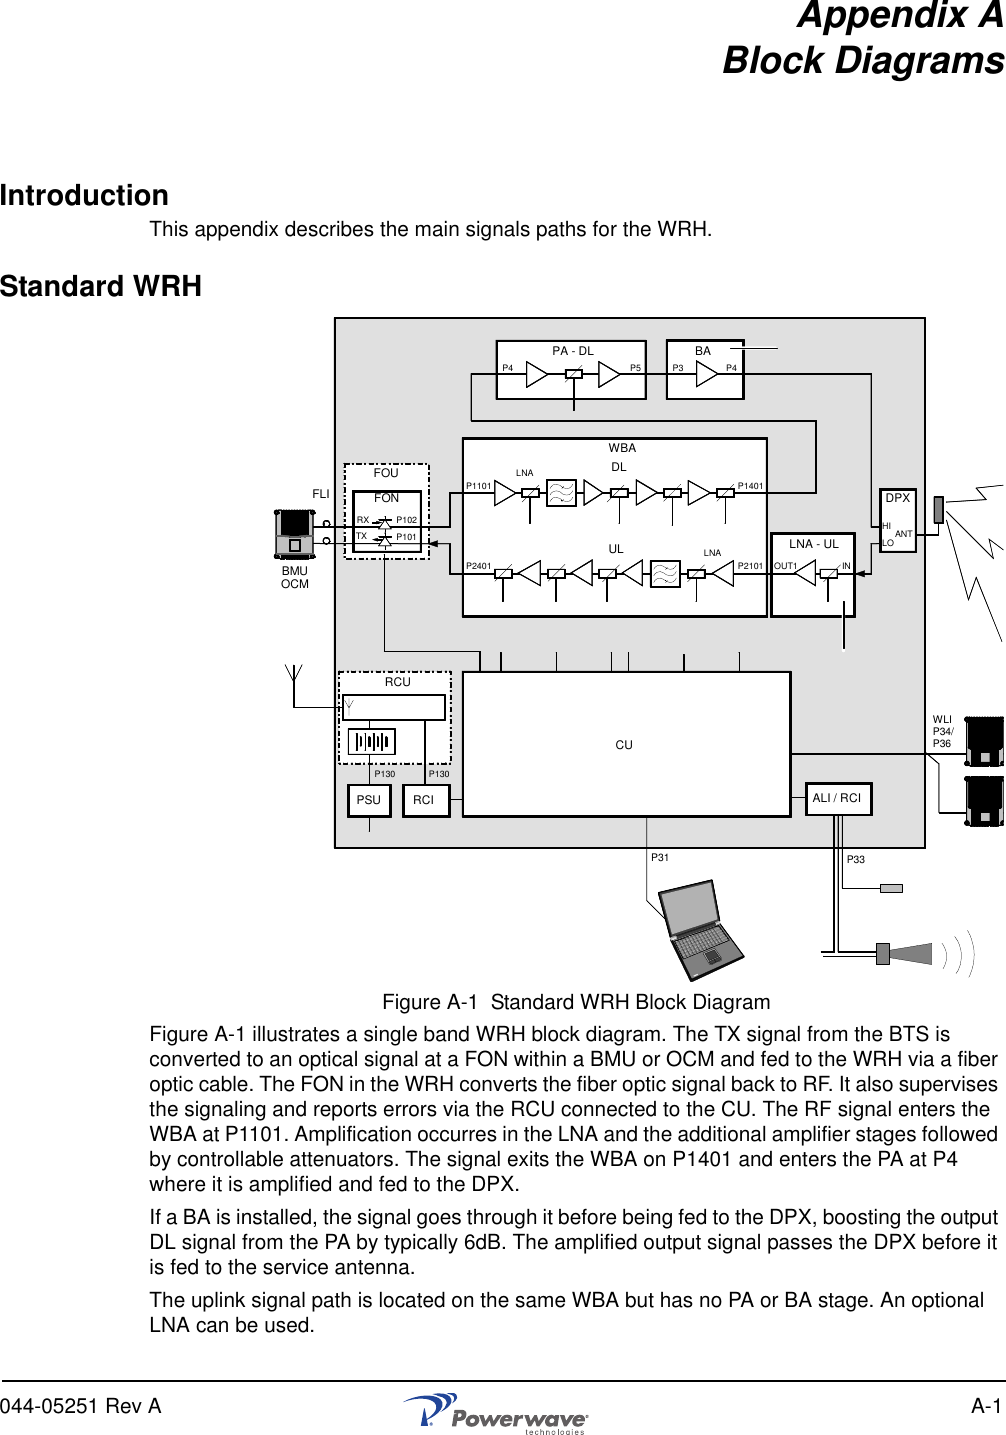 044-05251 Rev A A-1Appendix ABlock DiagramsIntroductionThis appendix describes the main signals paths for the WRH.Standard WRHFigure A-1  Standard WRH Block DiagramFigure A-1 illustrates a single band WRH block diagram. The TX signal from the BTS is converted to an optical signal at a FON within a BMU or OCM and fed to the WRH via a fiber optic cable. The FON in the WRH converts the fiber optic signal back to RF. It also supervises the signaling and reports errors via the RCU connected to the CU. The RF signal enters the WBA at P1101. Amplification occurres in the LNA and the additional amplifier stages followed by controllable attenuators. The signal exits the WBA on P1401 and enters the PA at P4 where it is amplified and fed to the DPX. If a BA is installed, the signal goes through it before being fed to the DPX, boosting the output DL signal from the PA by typically 6dB. The amplified output signal passes the DPX before it is fed to the service antenna.The uplink signal path is located on the same WBA but has no PA or BA stage. An optional LNA can be used. FOUFONP102RXTX P101P130P31 P33WBAPA - DLLNADPXALI / RCIWLIP34/P36P130ANTHILOP1101 P1401P4 P5RCUPSU RCIBMUOCMFLIP4P3BALNAP2401 P2101CUDLUL LNA - ULOUT1 IN